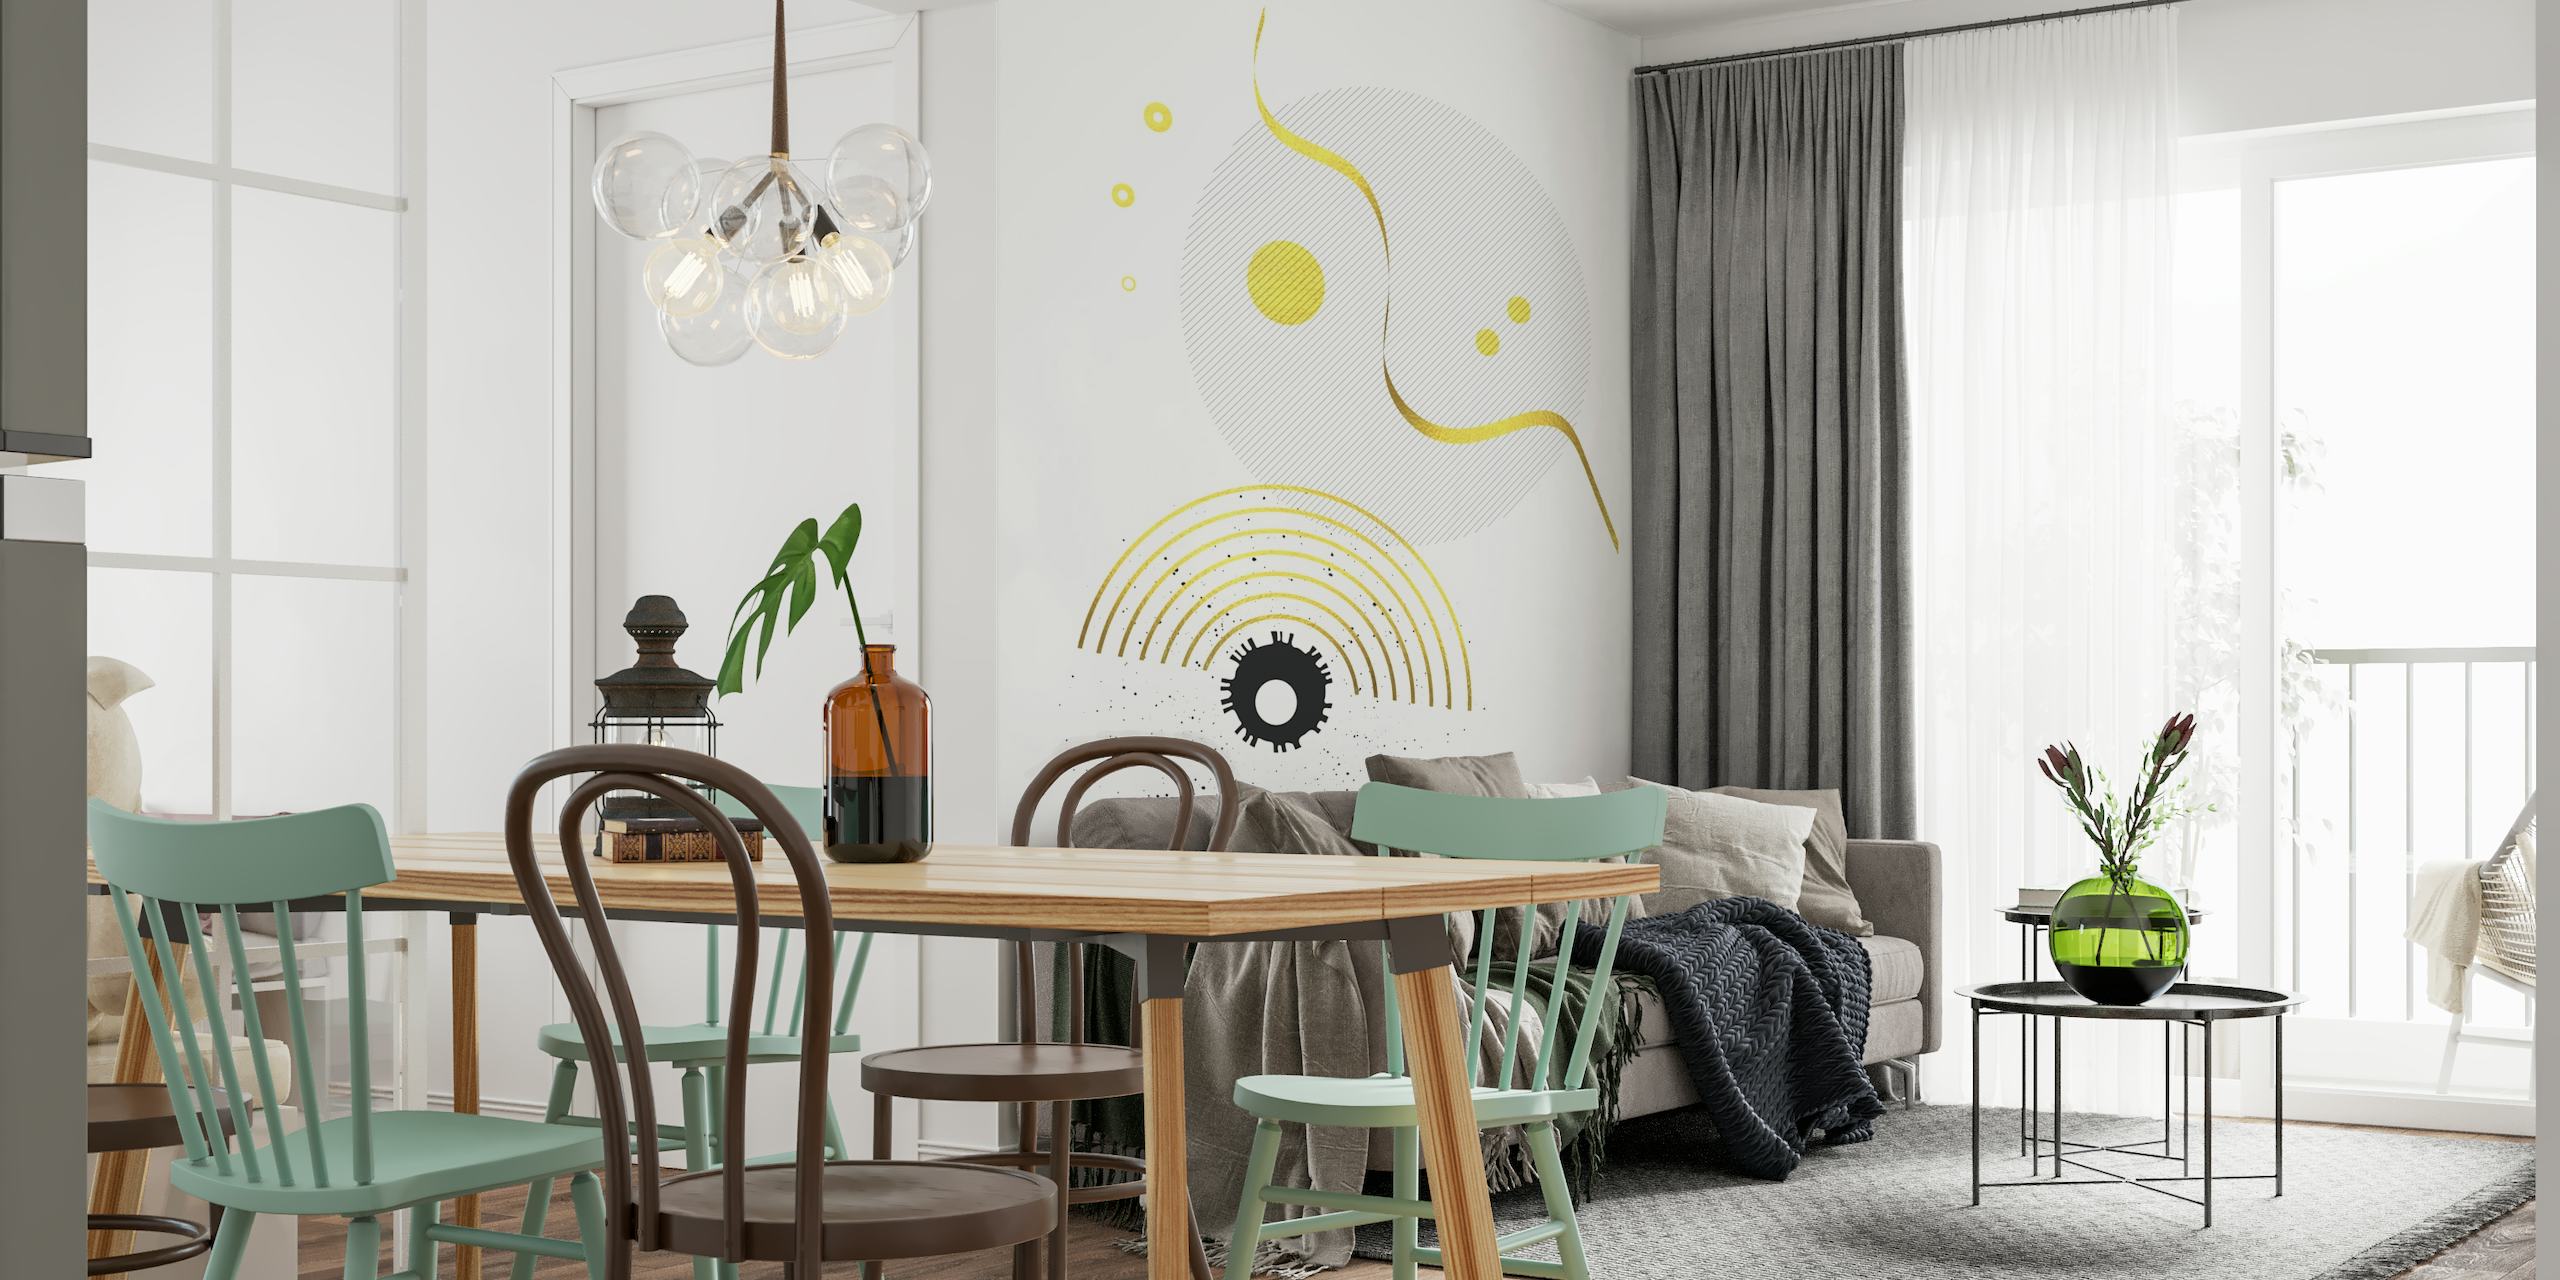 Abstract graphic art wall mural featuring geometric shapes in gold, yellow, and black